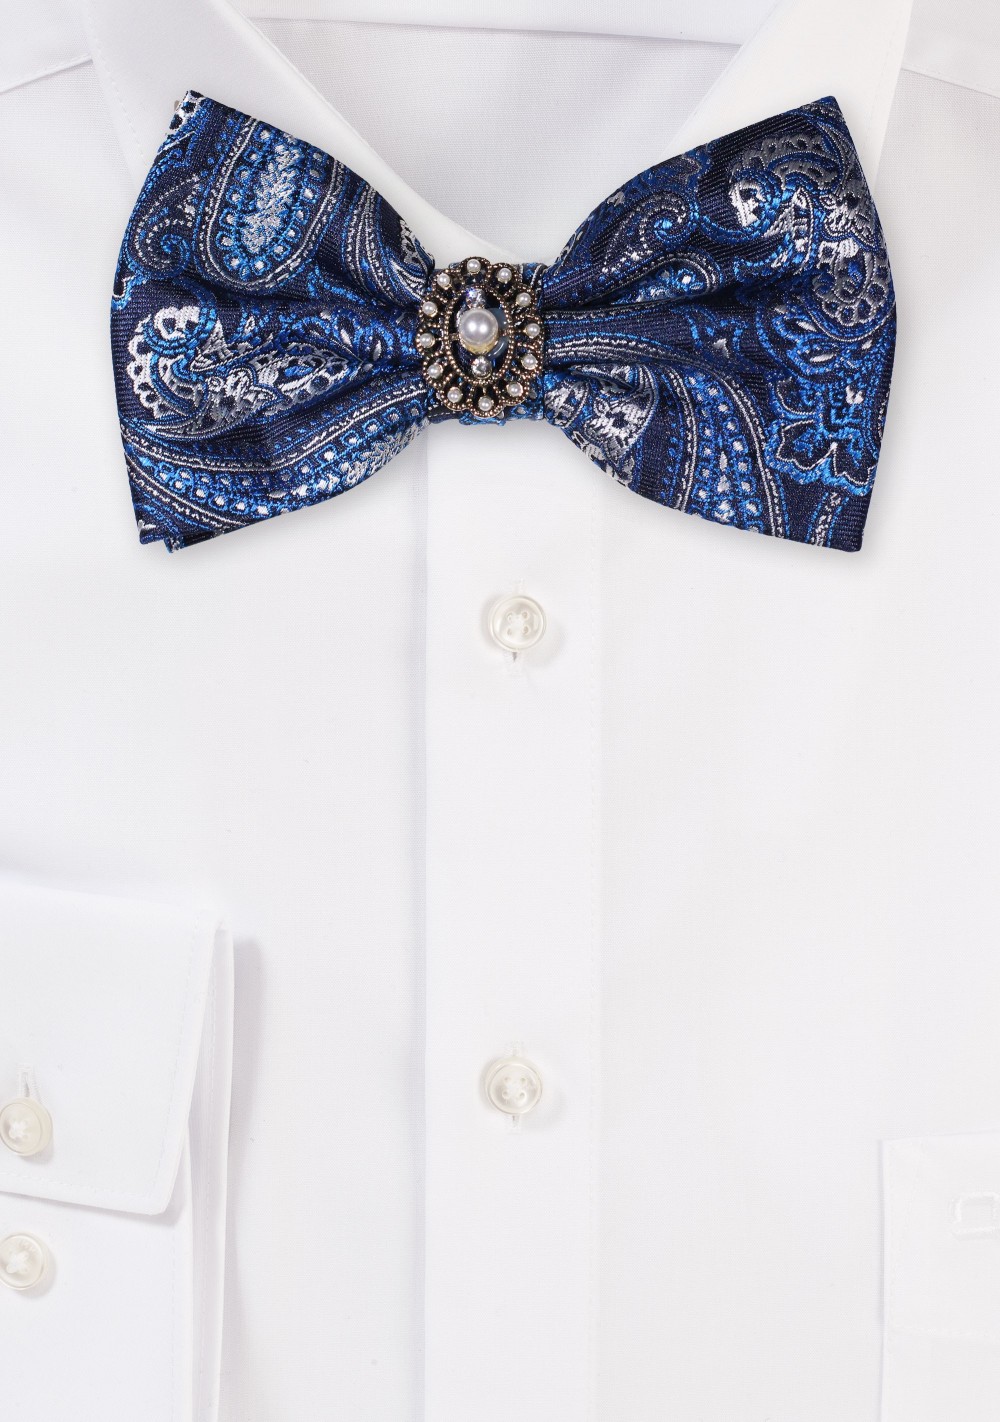 Blue Paisley Bow Tie with Center Pearl Decoration